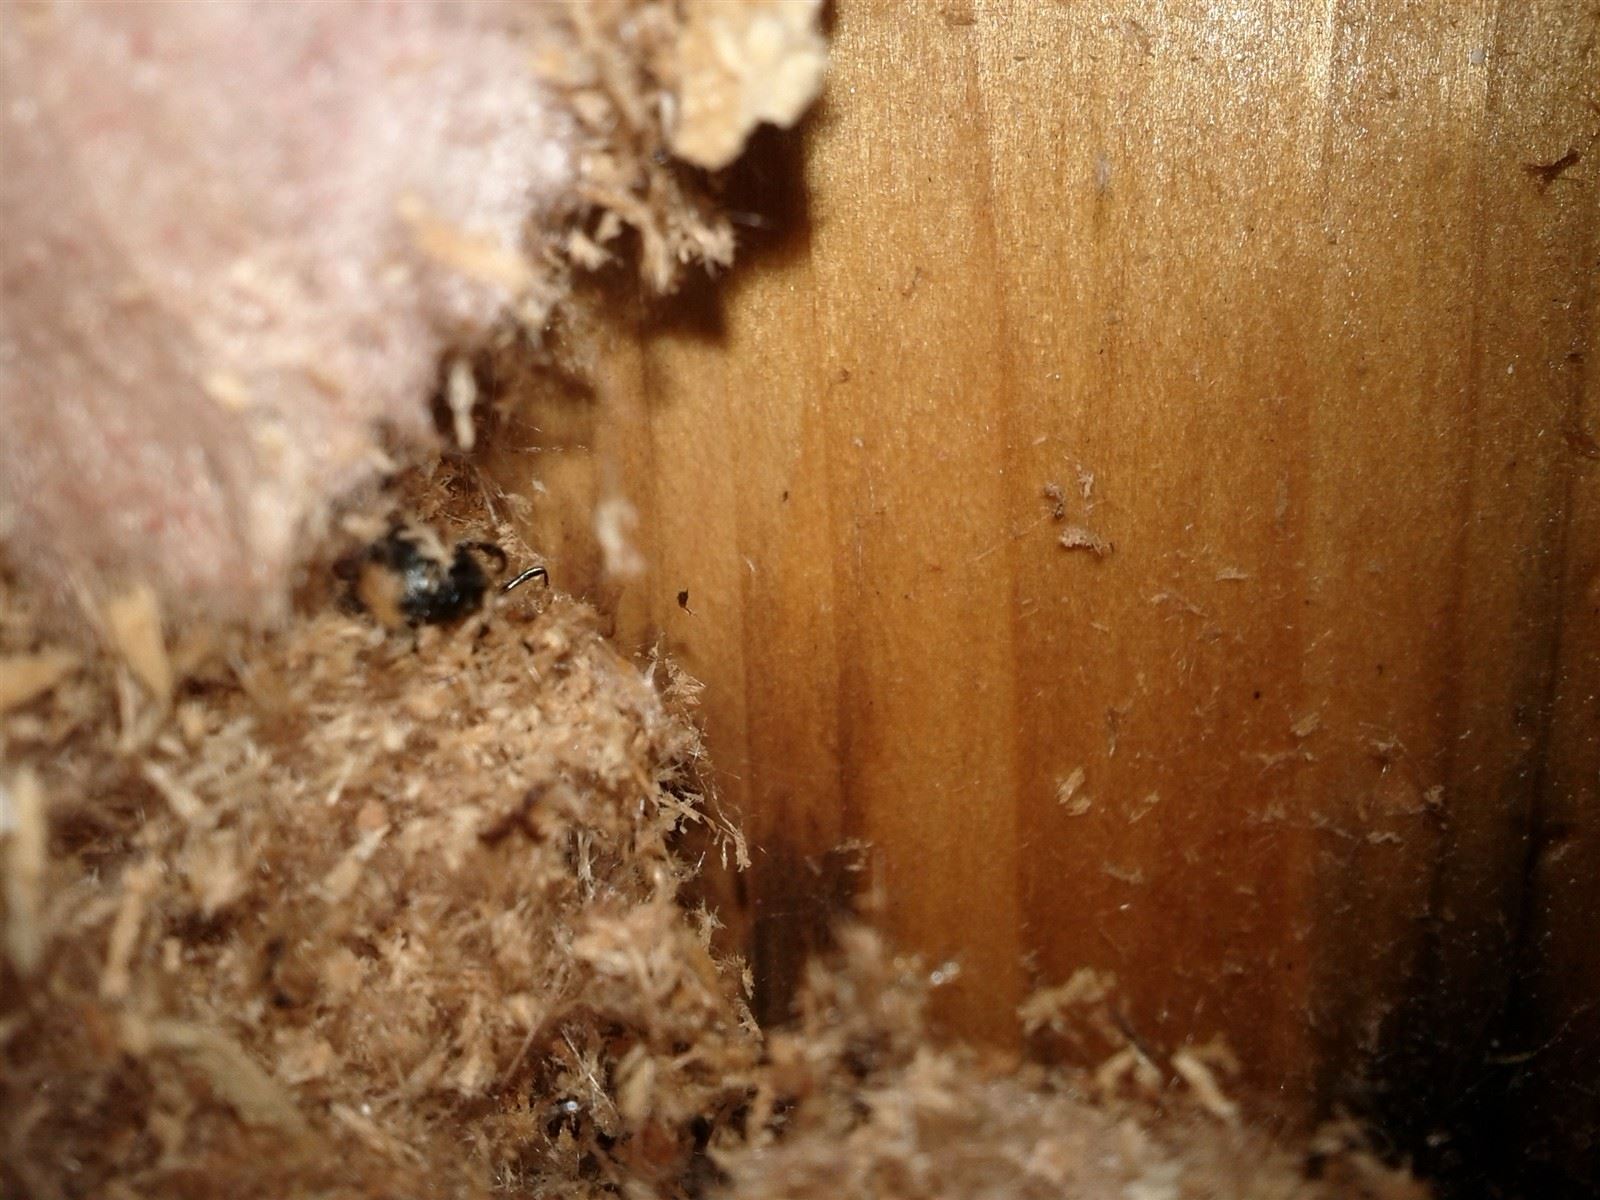 View with my Camera sticking inside of the hole once the plate was removed showing frass (sawdust like material) caused by Carpenter Ants.